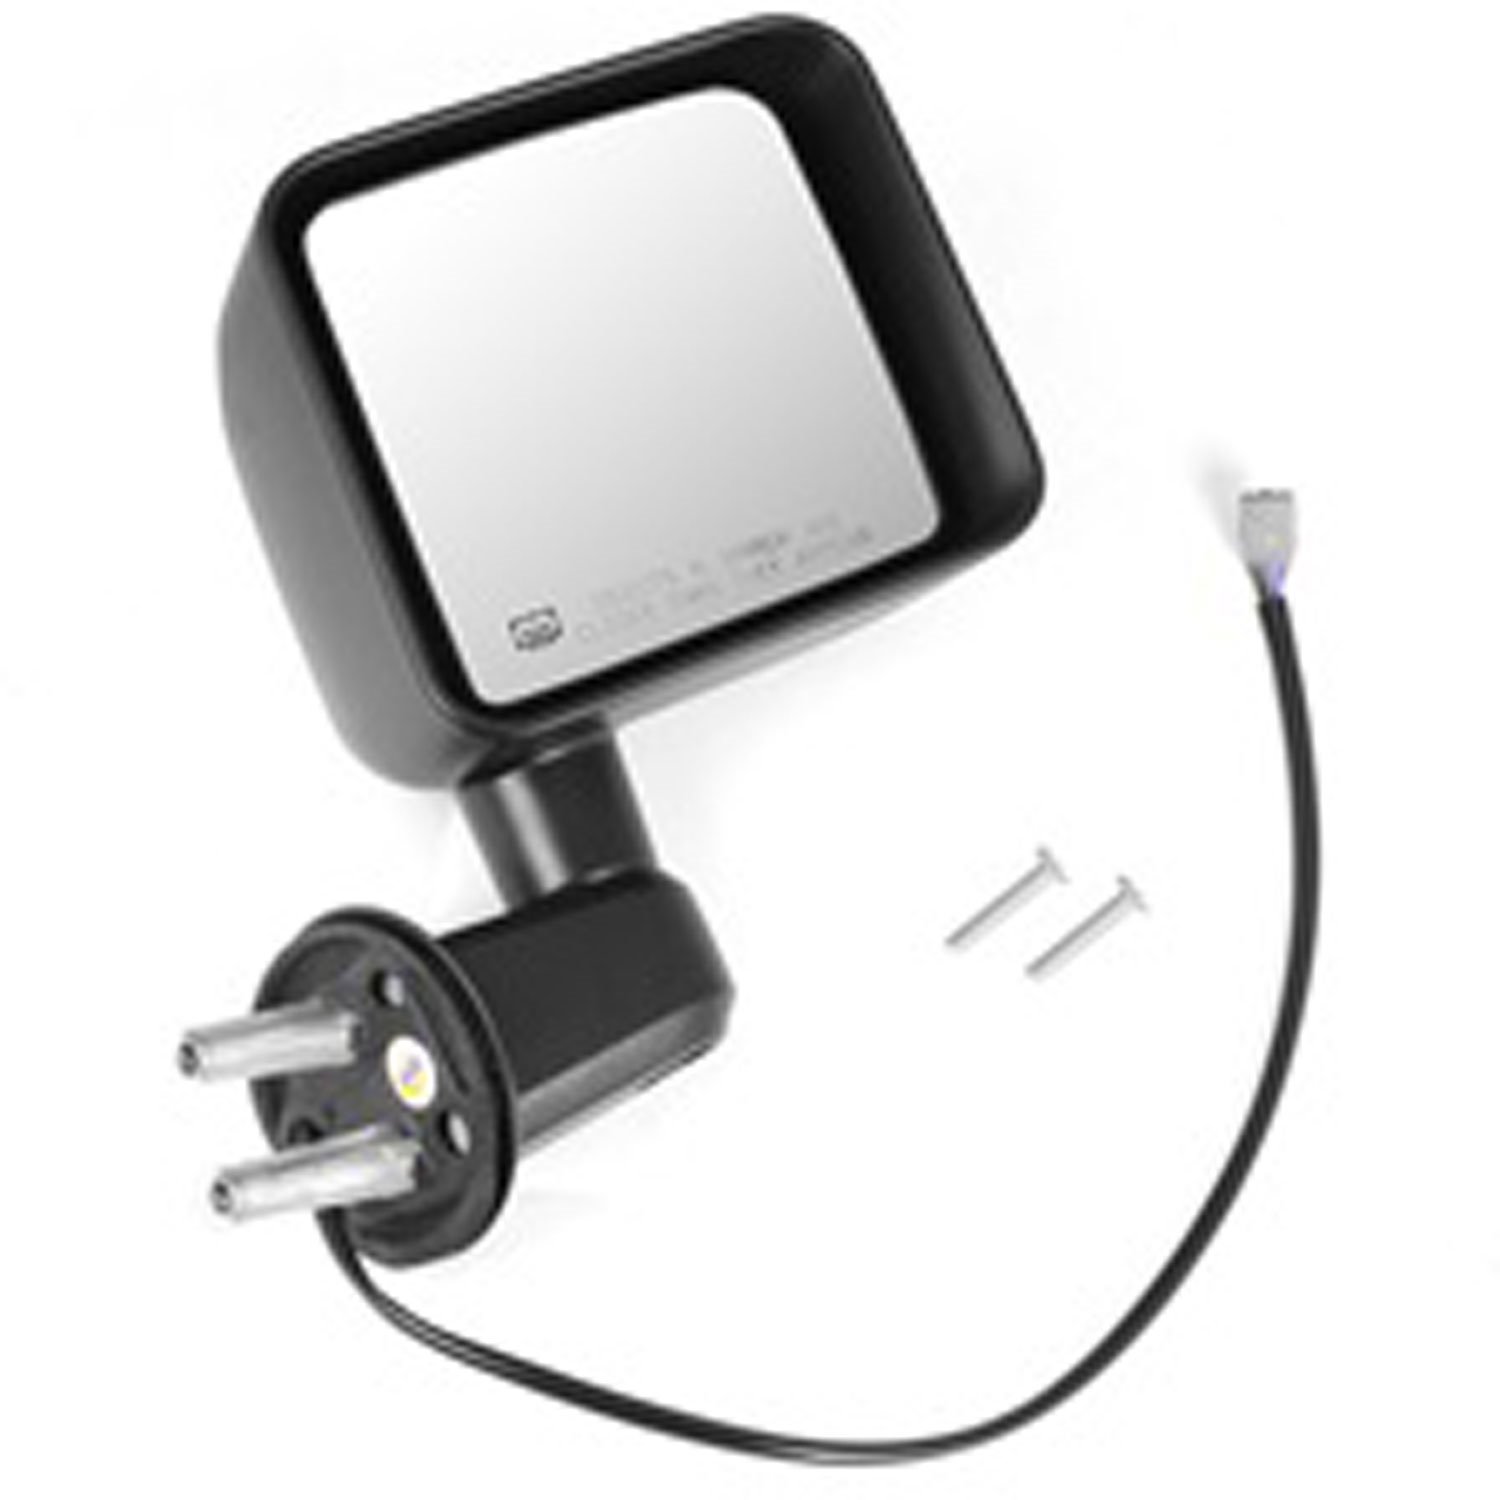 This black heated power mirror from Omix-ADA fits the right hand side on 11-13 Jeep Wrangler.